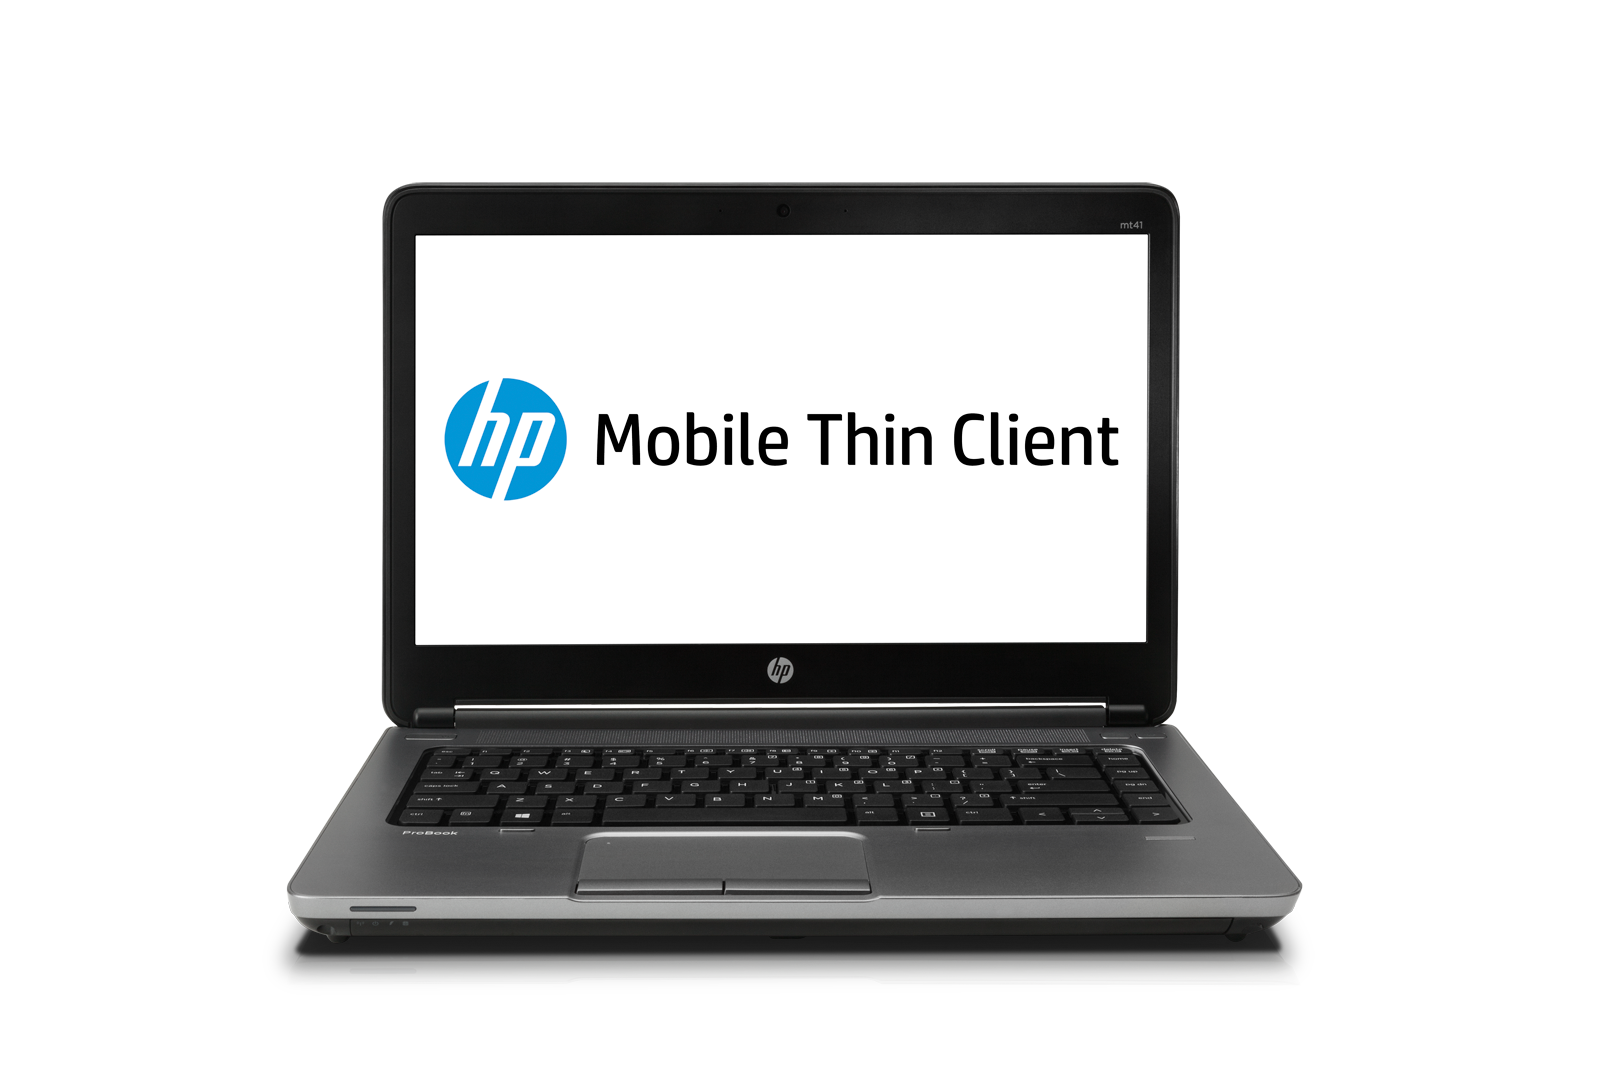 http://www.thinclient.org/thinclient-news/mt41%20%282%29.png